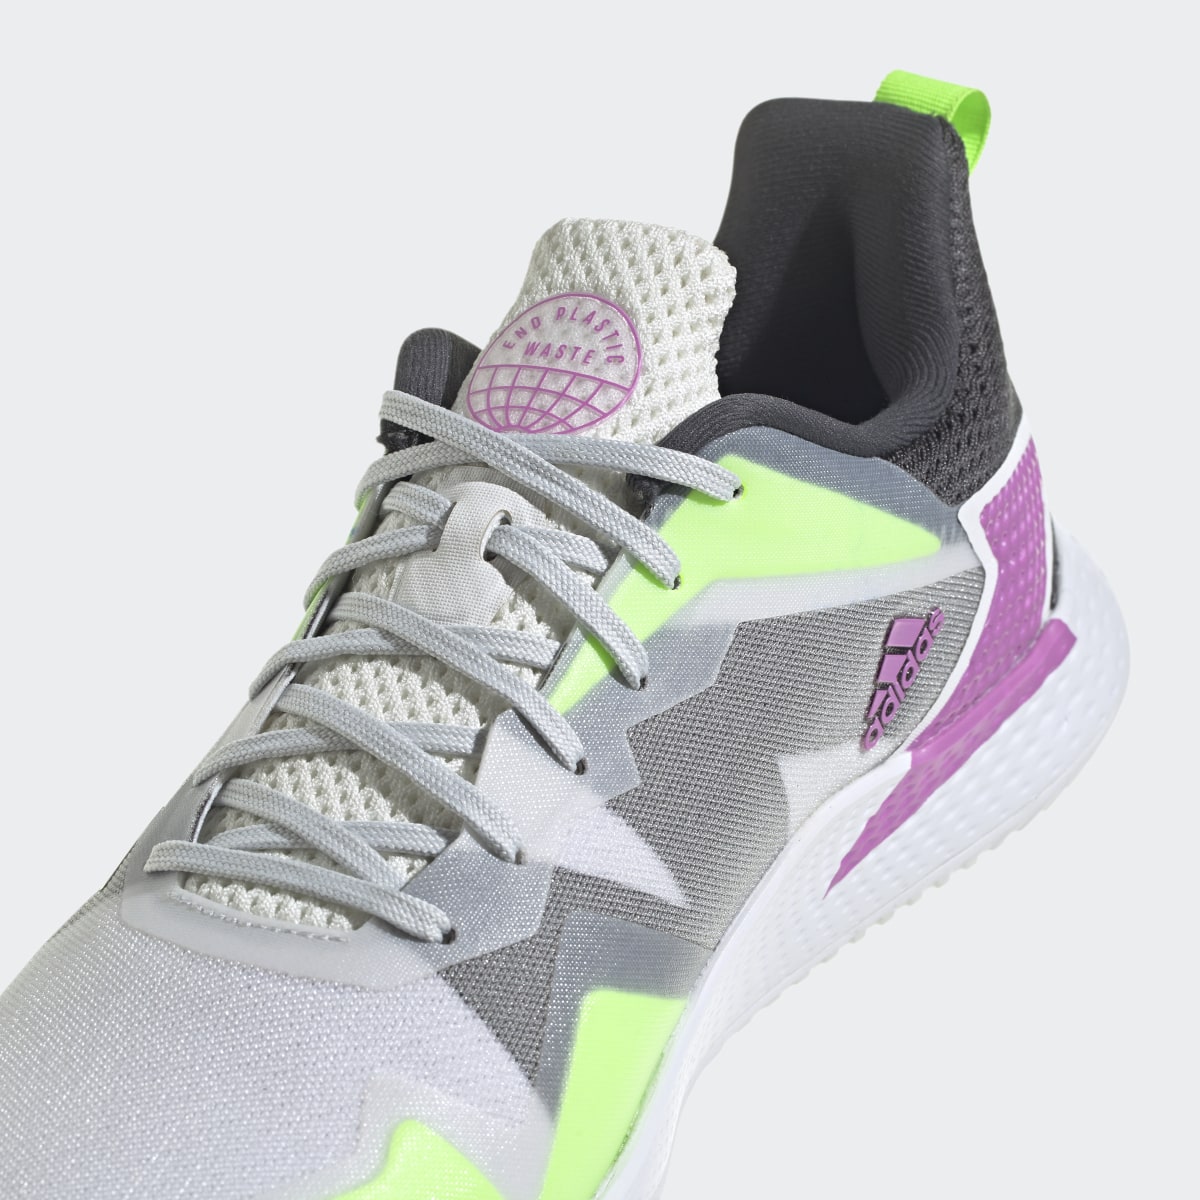 Adidas Defiant Speed Tennis Shoes. 9